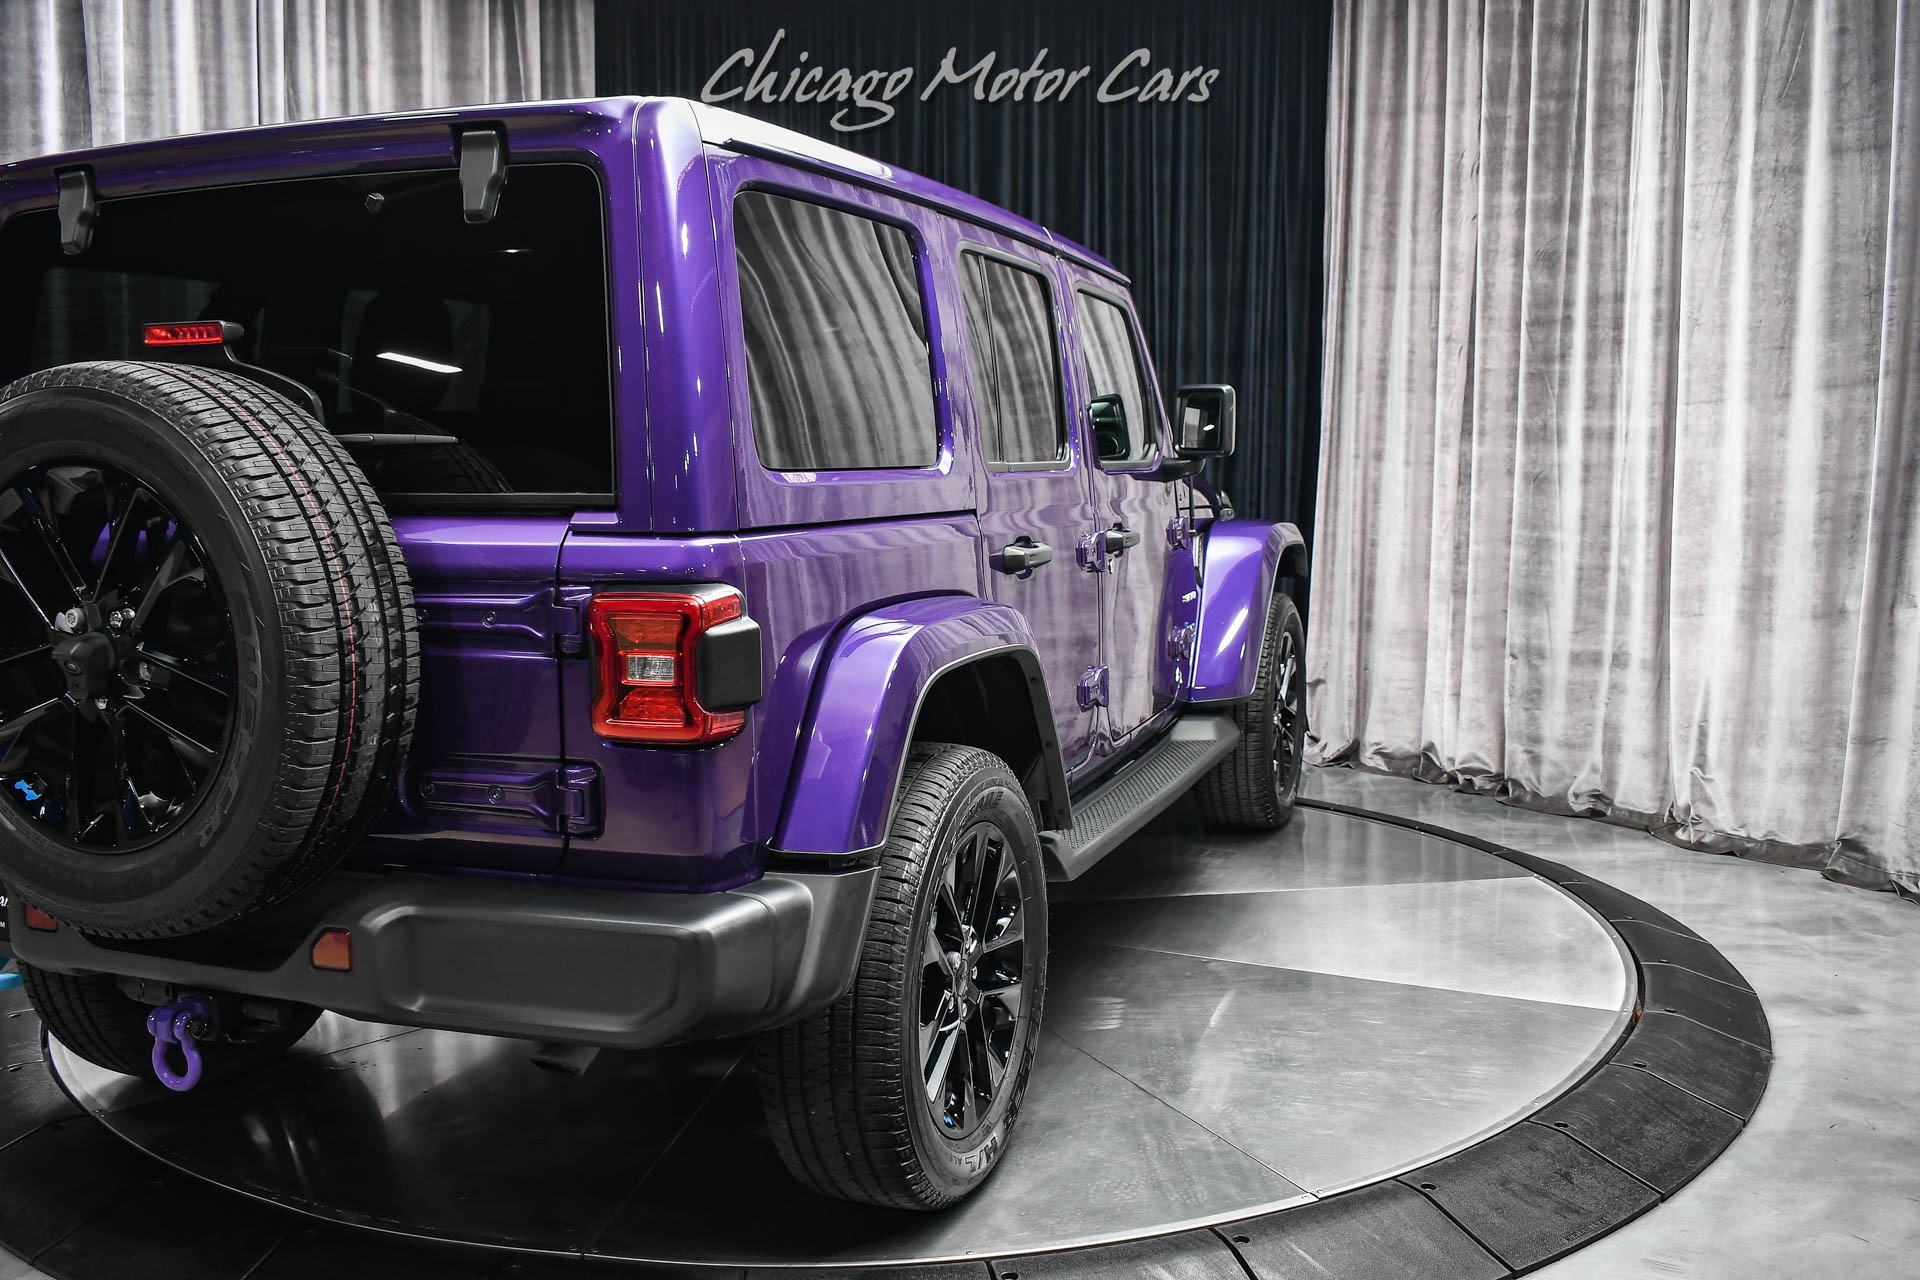 Used 2023 Jeep Wrangler Unlimited Sahara 4xe! Limited Edition Purple Reign  Color Cold Weather Package For Sale (Special Pricing) | Chicago Motor Cars  Stock #20100